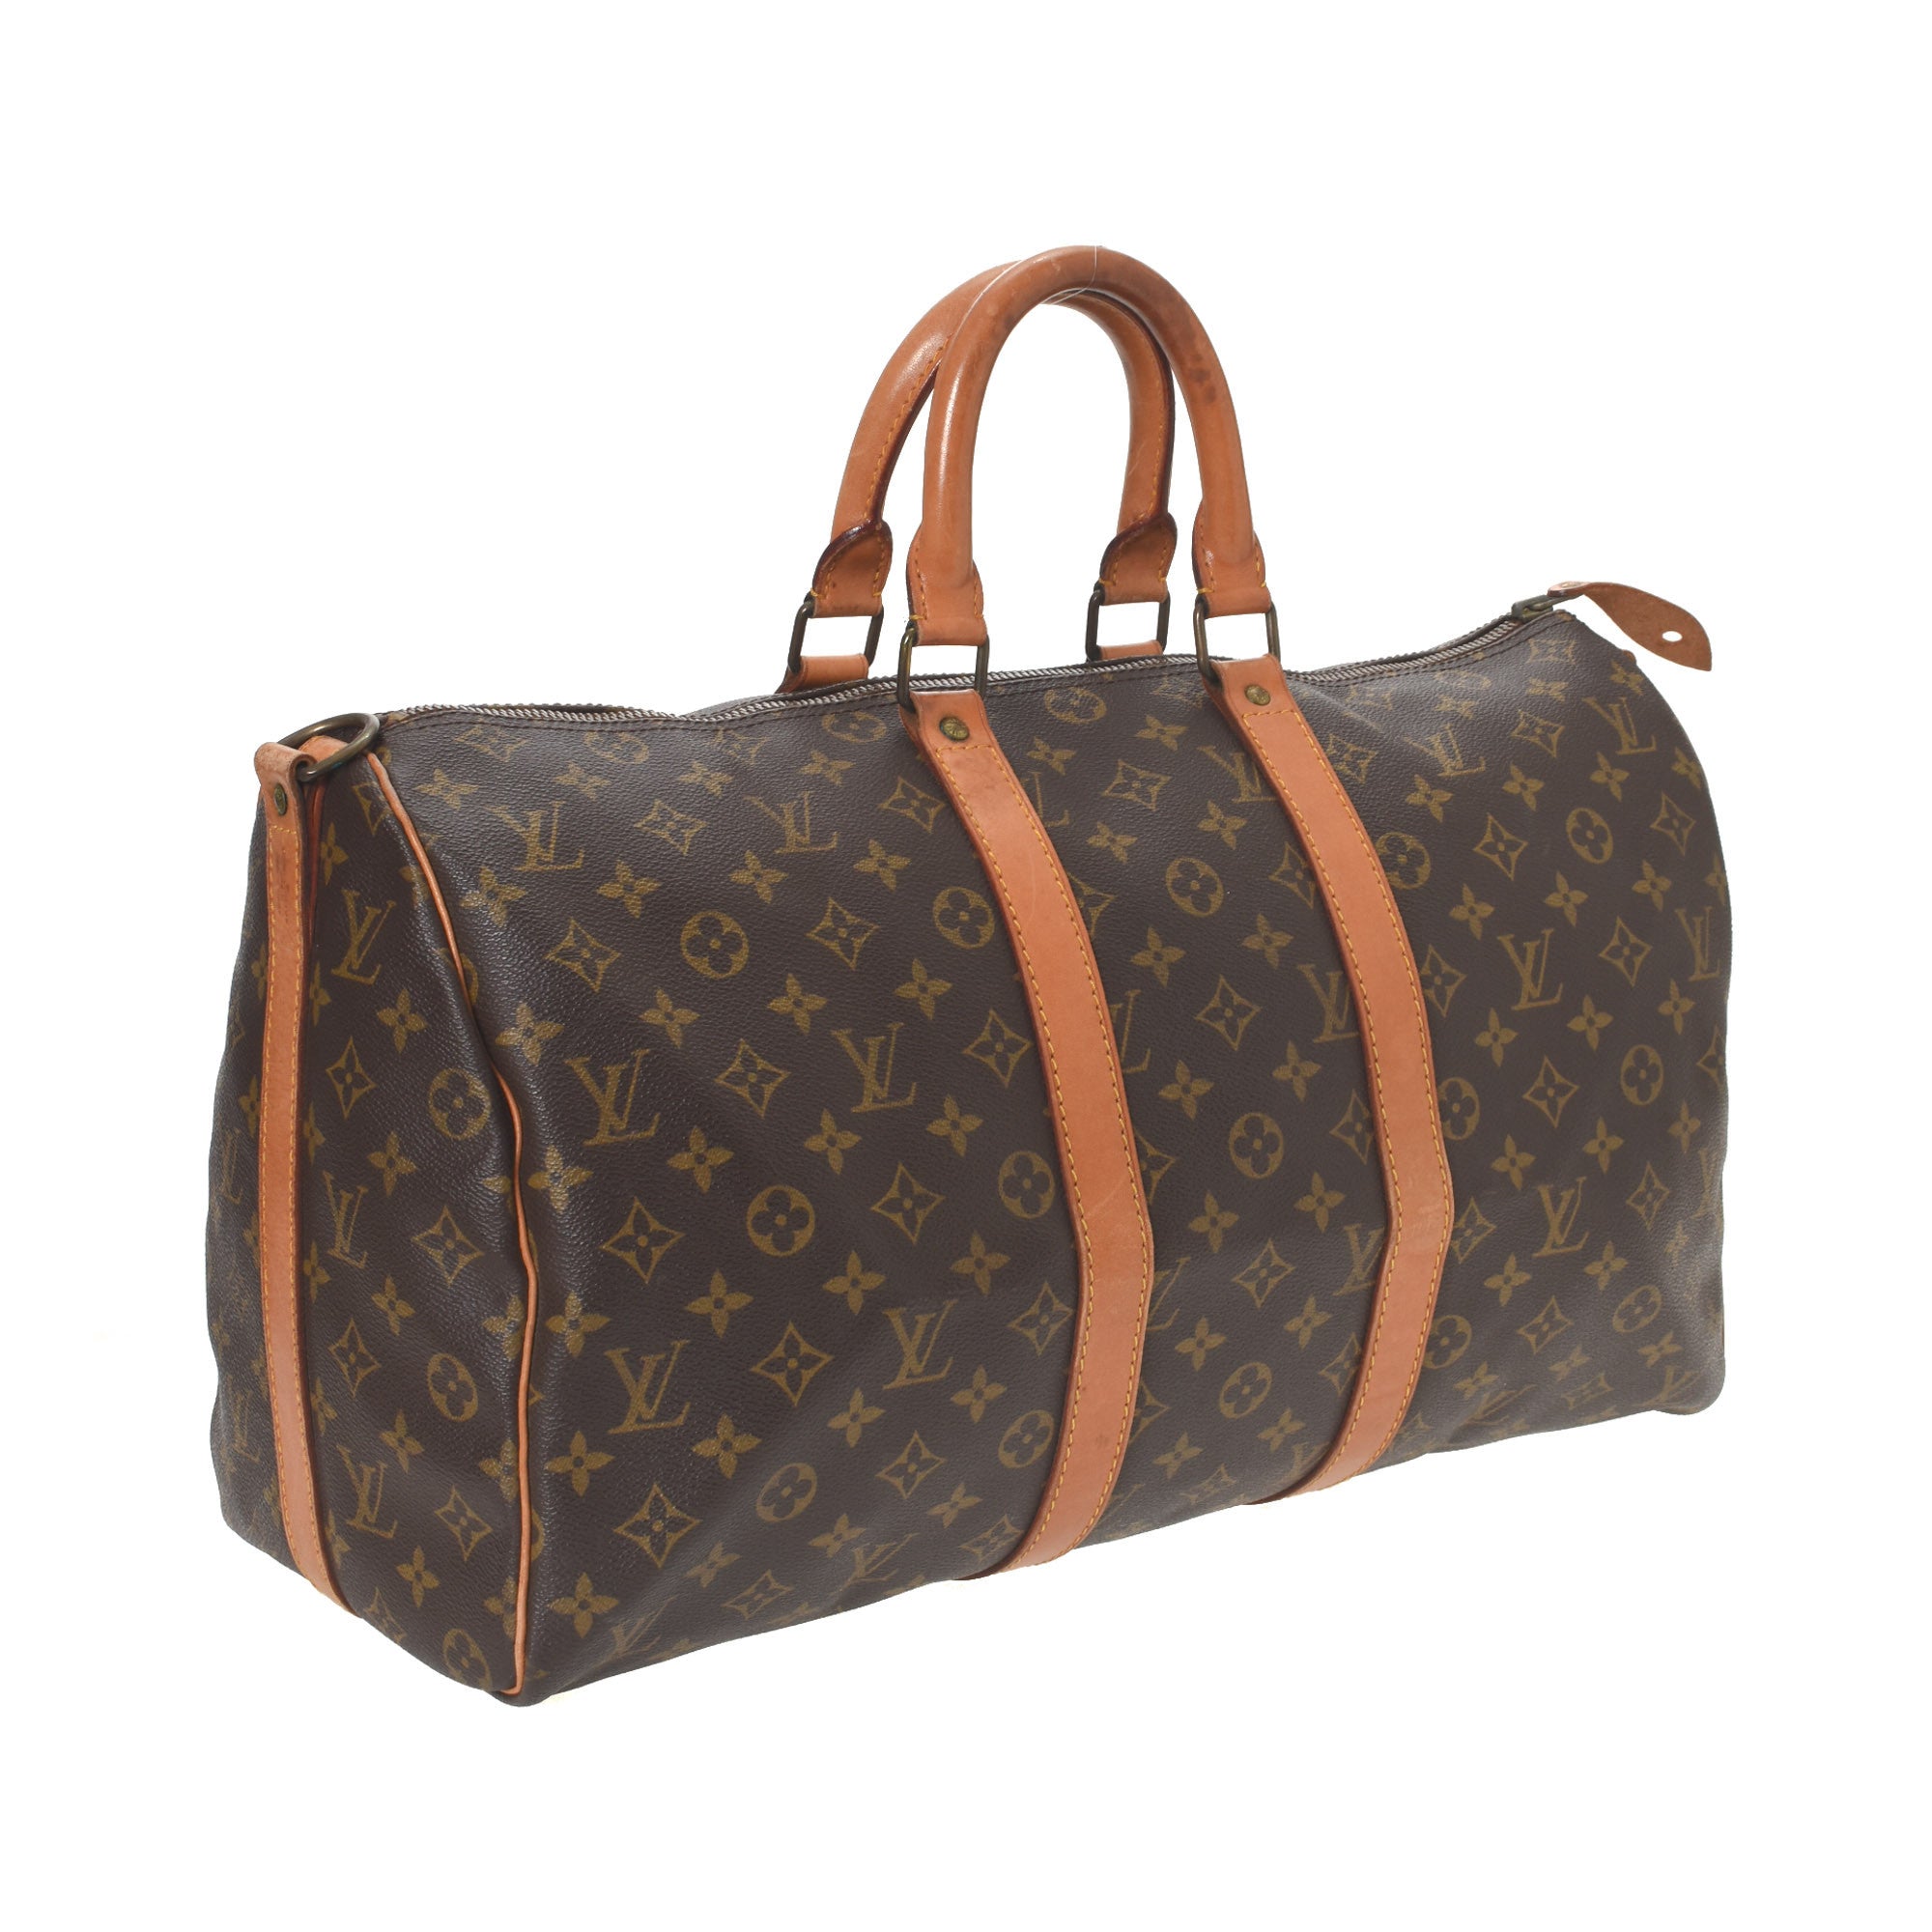 The Royal Bags Canada Inc  SOLD FLASH SALE LOUIS VUITTON NEVERFULL GM  Made in France Date Code TH 2097 Style Tote Material Monogram Canvas  Interior Beige Measurements  40 x 33